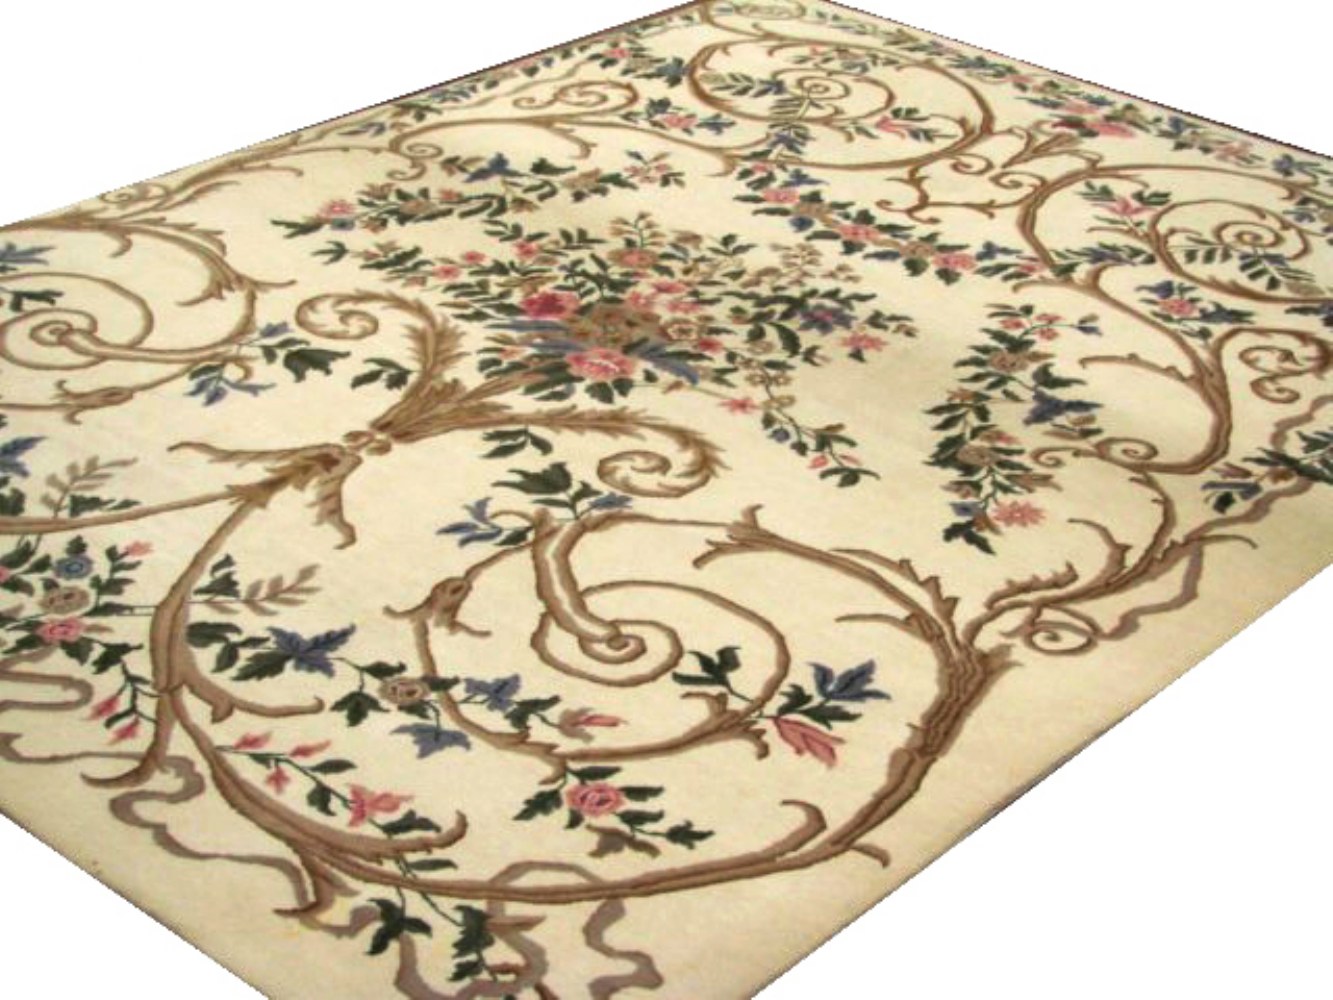 9x12 Traditional Hand Knotted Wool Area Rug - MR0503